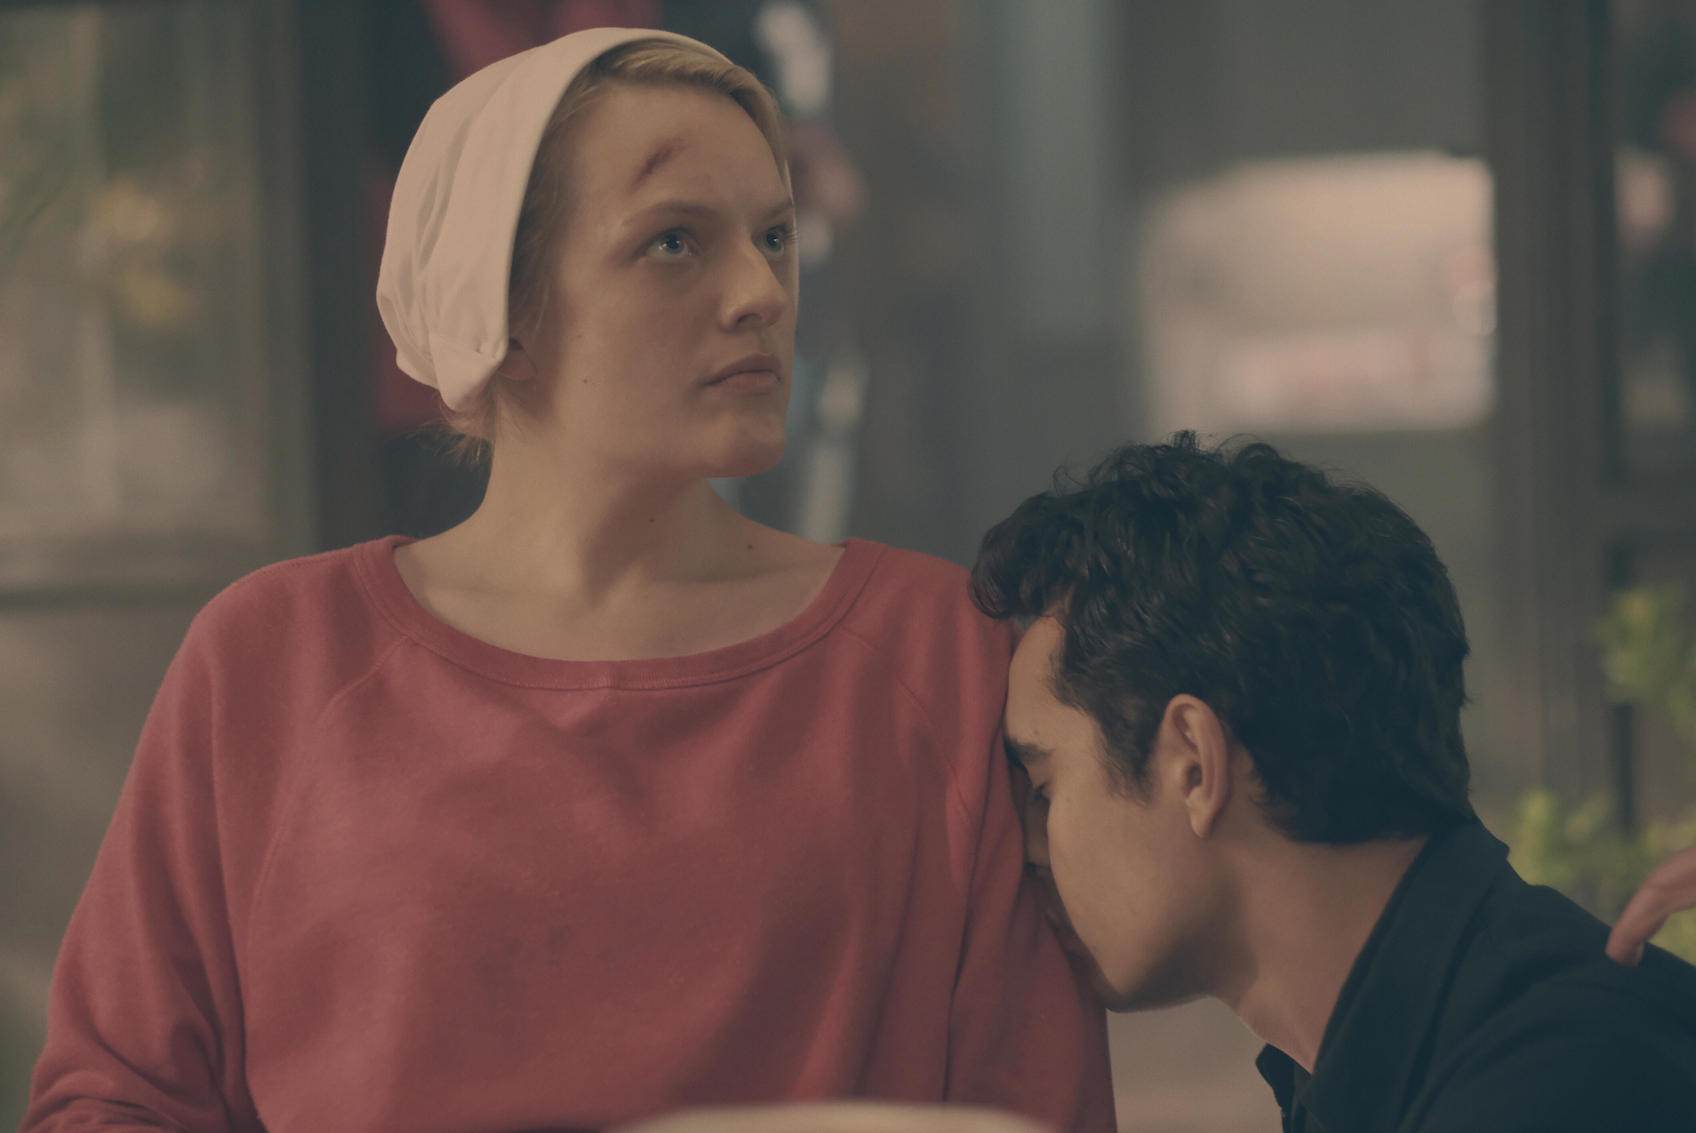 'The Handmaid's Tale' Season 4 star Elisabeth Moss as June Osborne allowing actor Max Minghella as Nick to rest his head on her shoulder